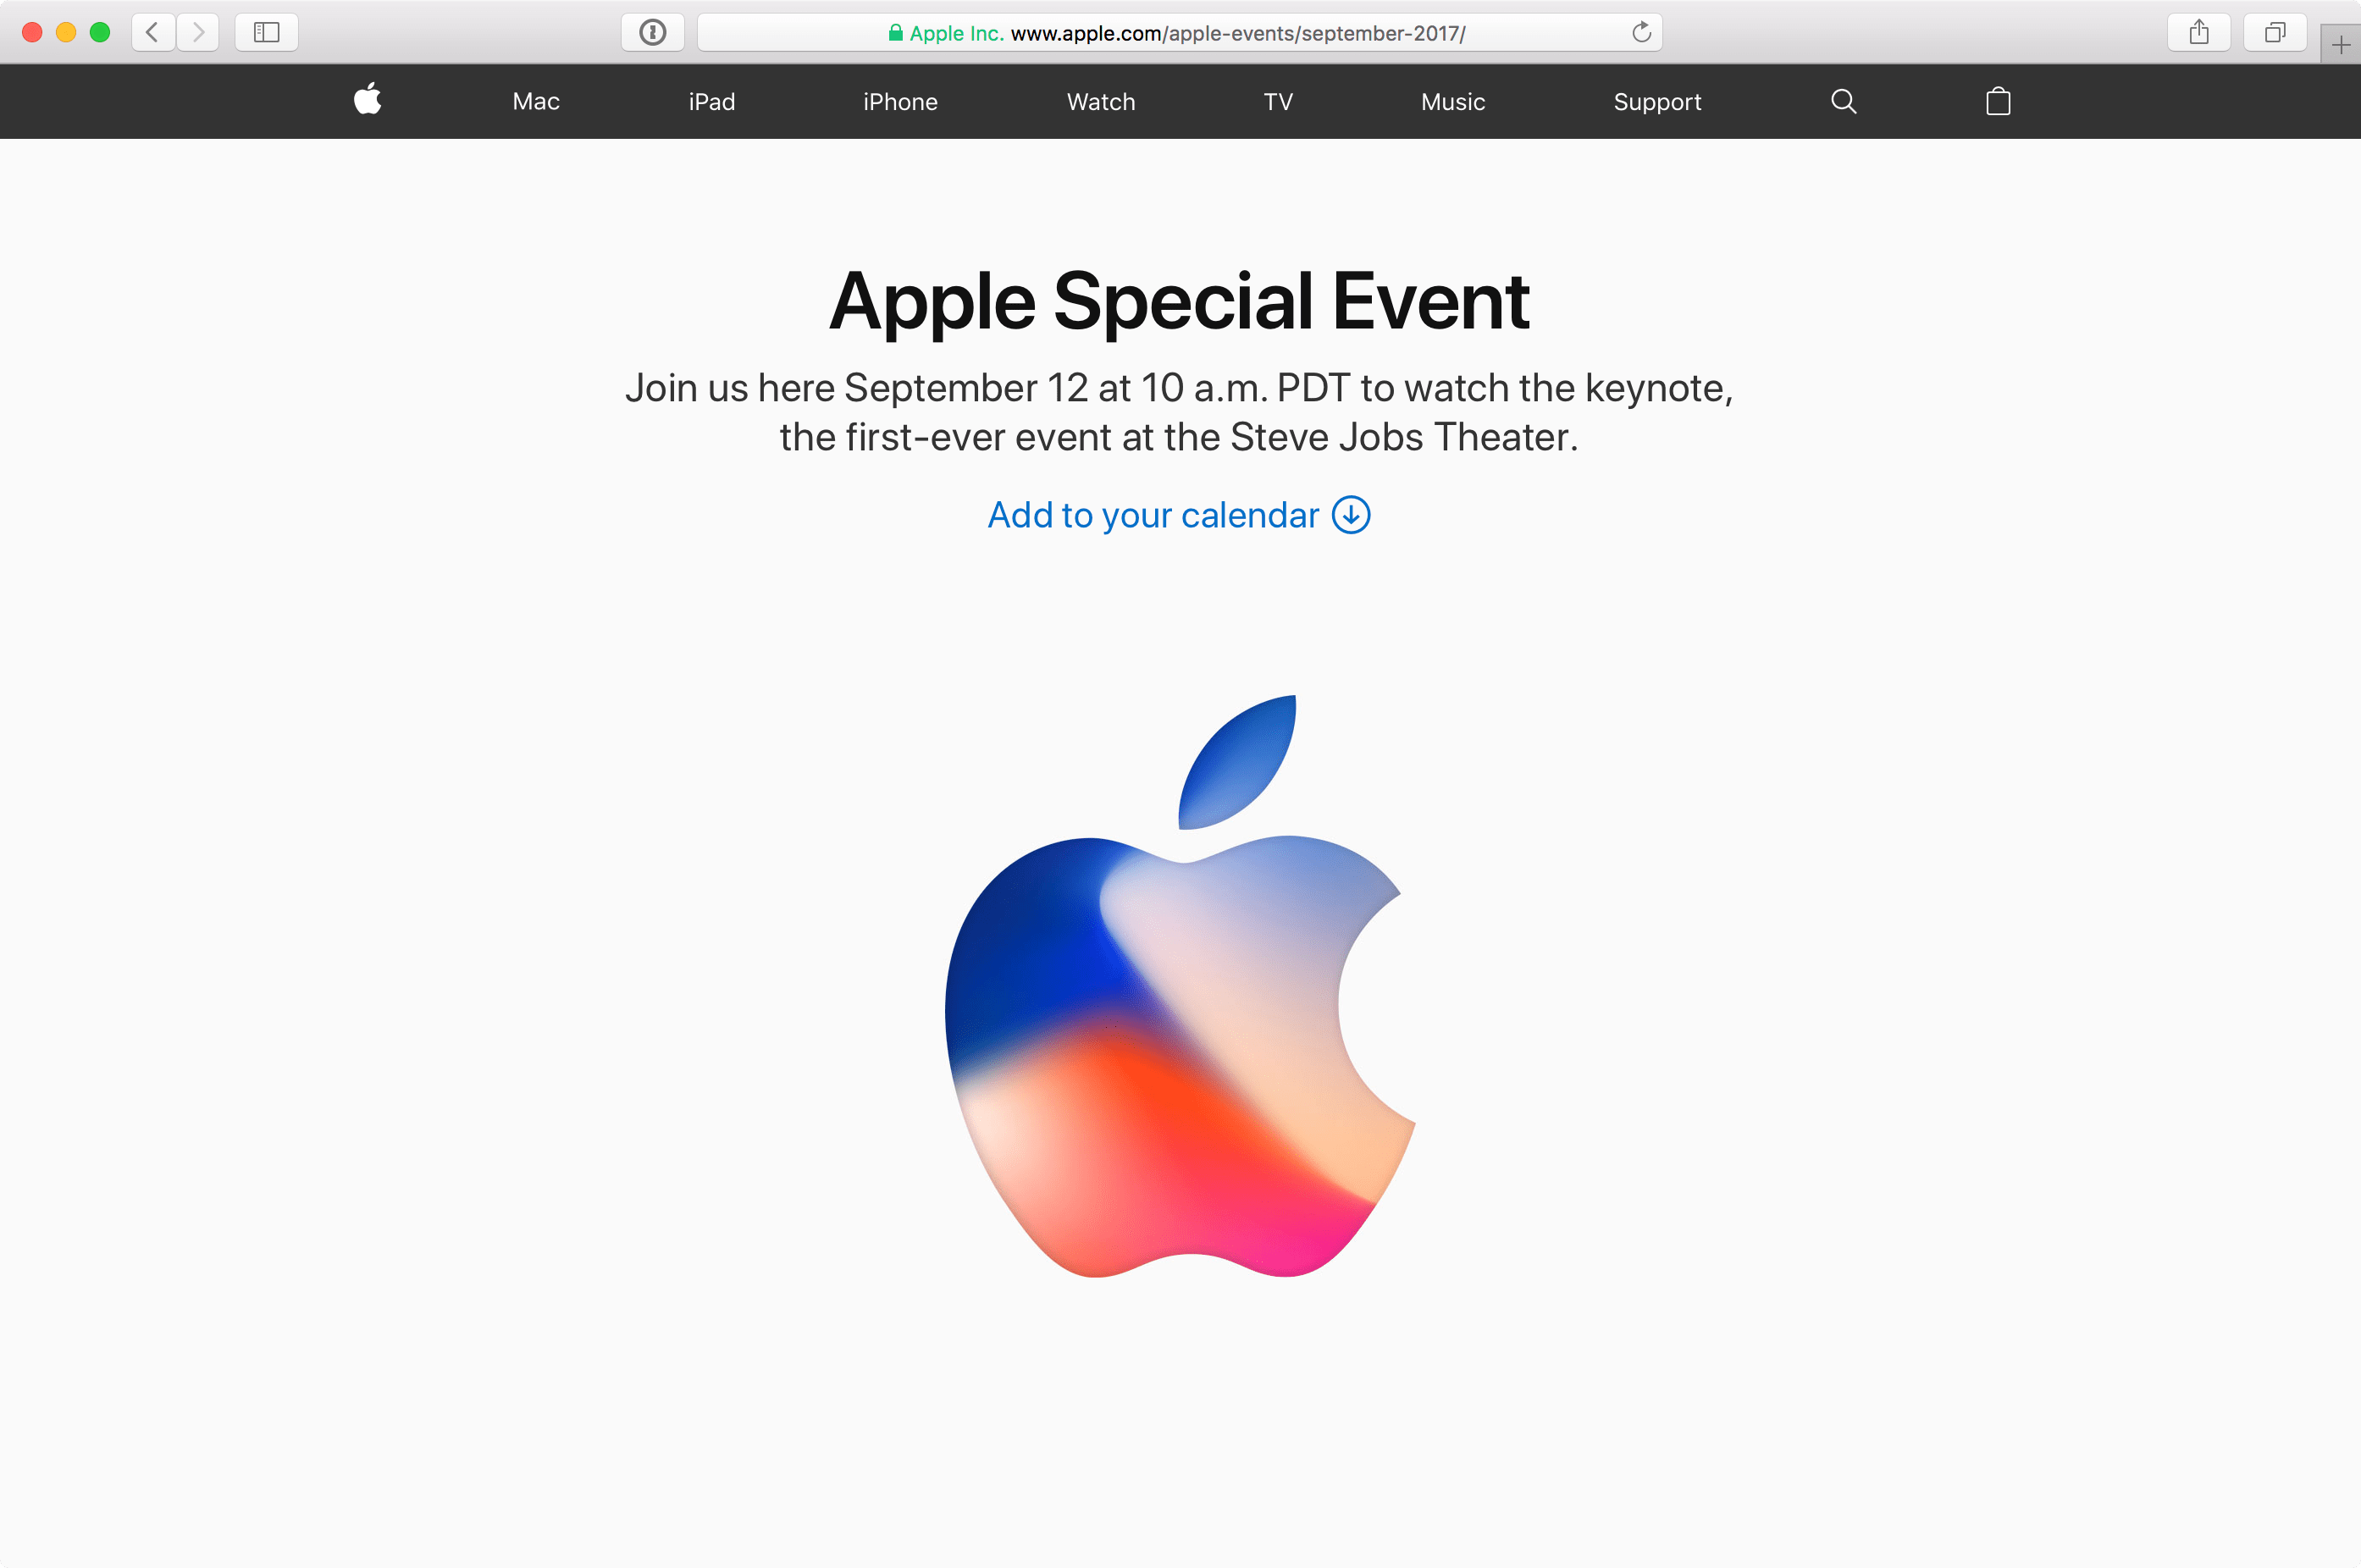 Live streaming on the Apple website